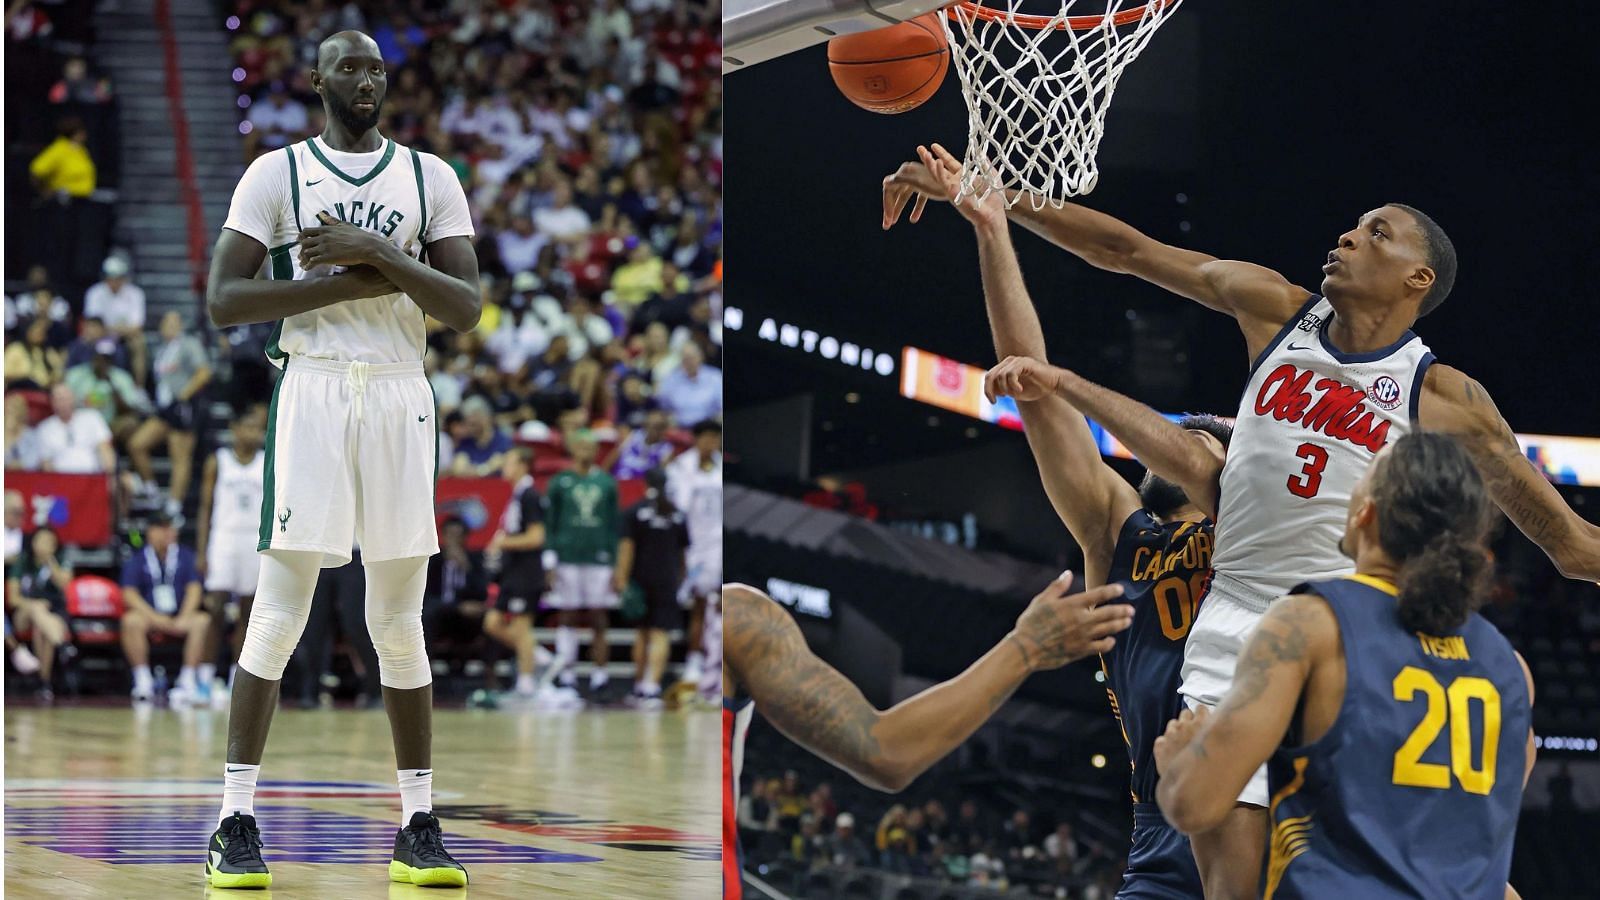 Tacko Fall and Jamarion Sharp are two of the longest players in college hoops history.